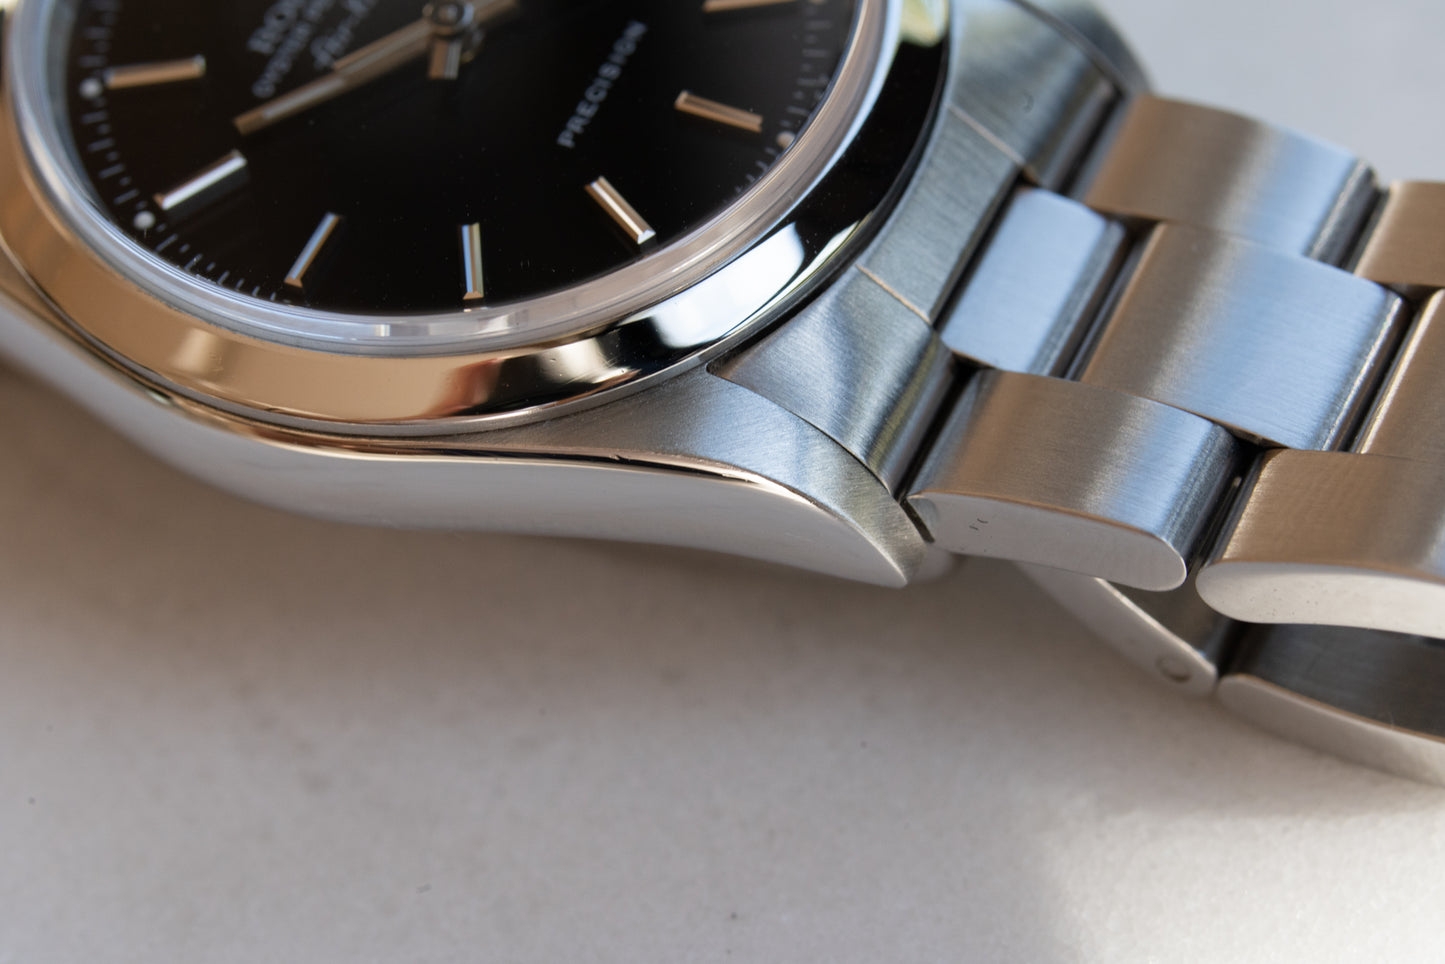 Rolex Air King 14000 Black Dial from 1997